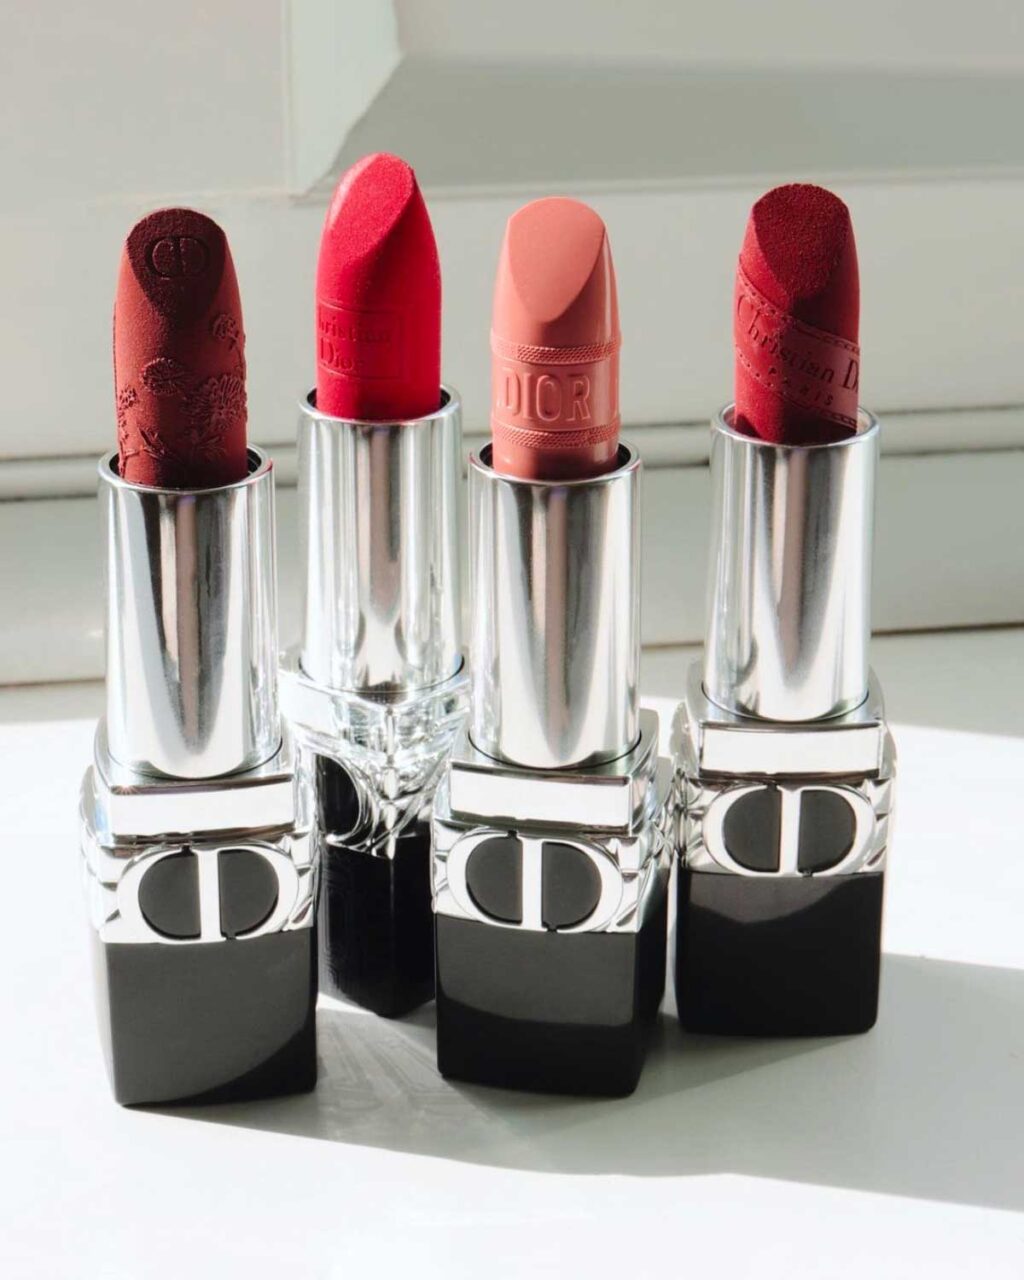 What is the best lipstick to use?